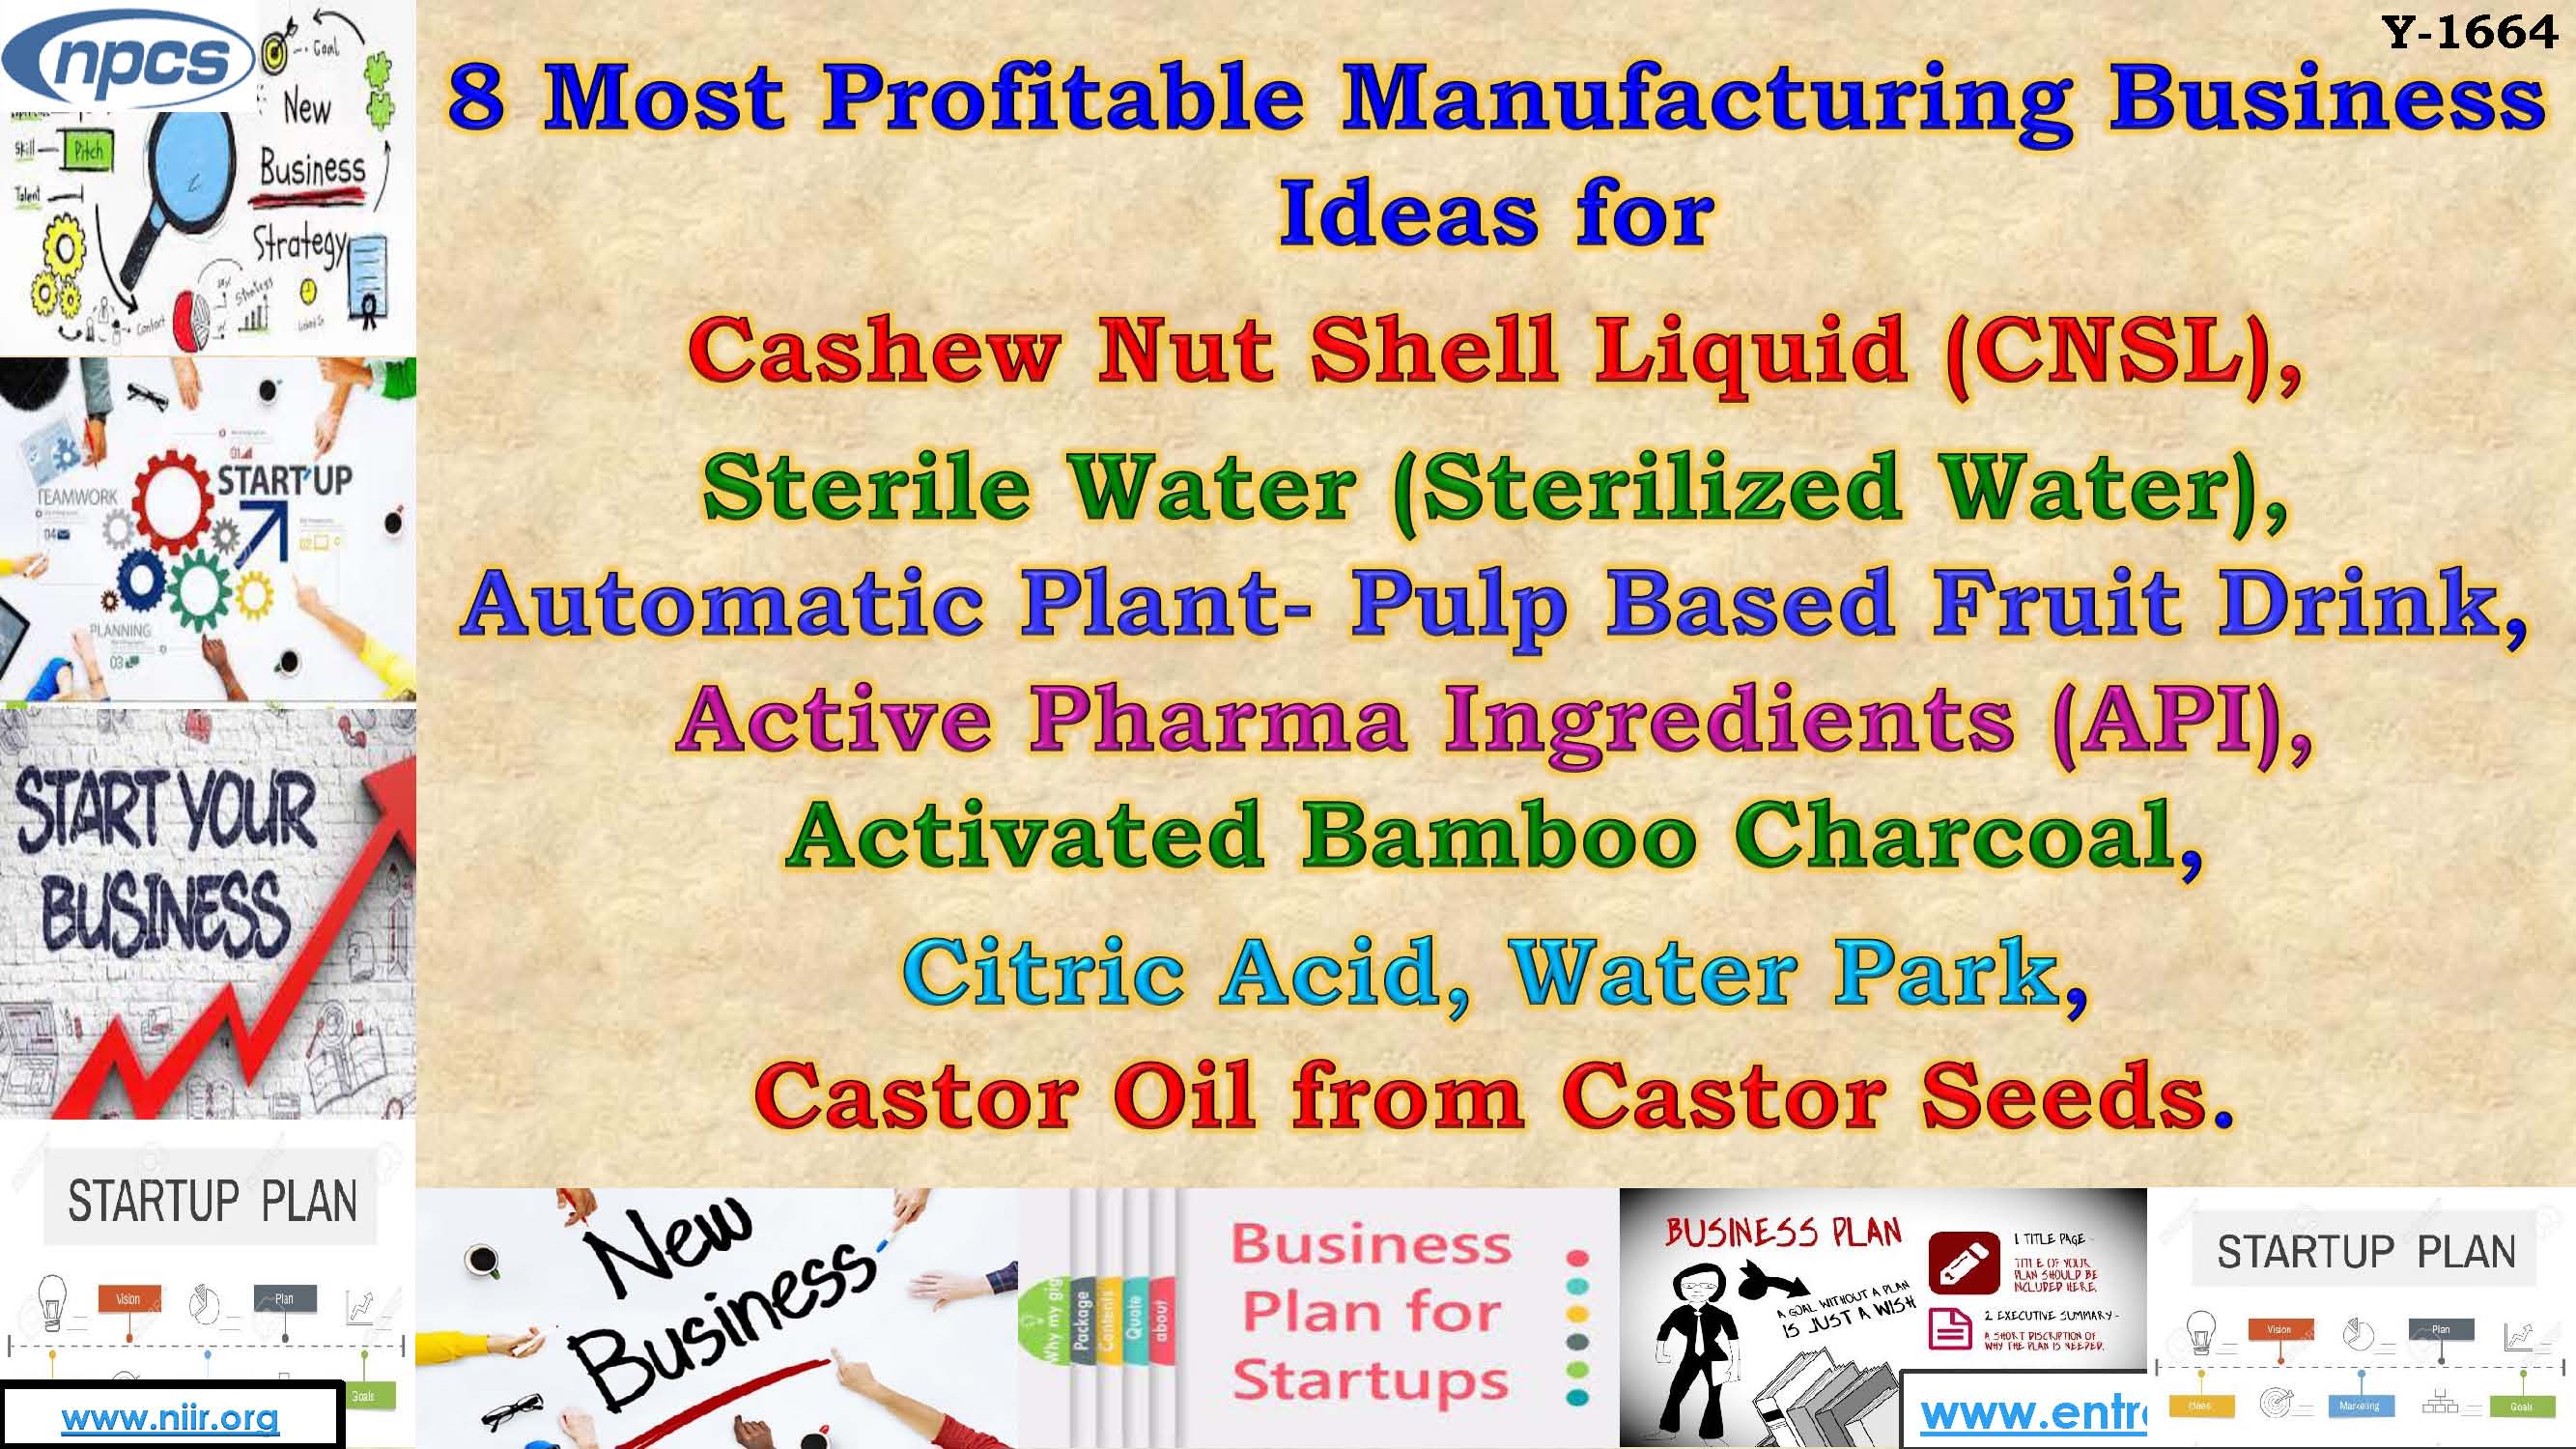 8 Most Profitable Manufacturing Business Ideas